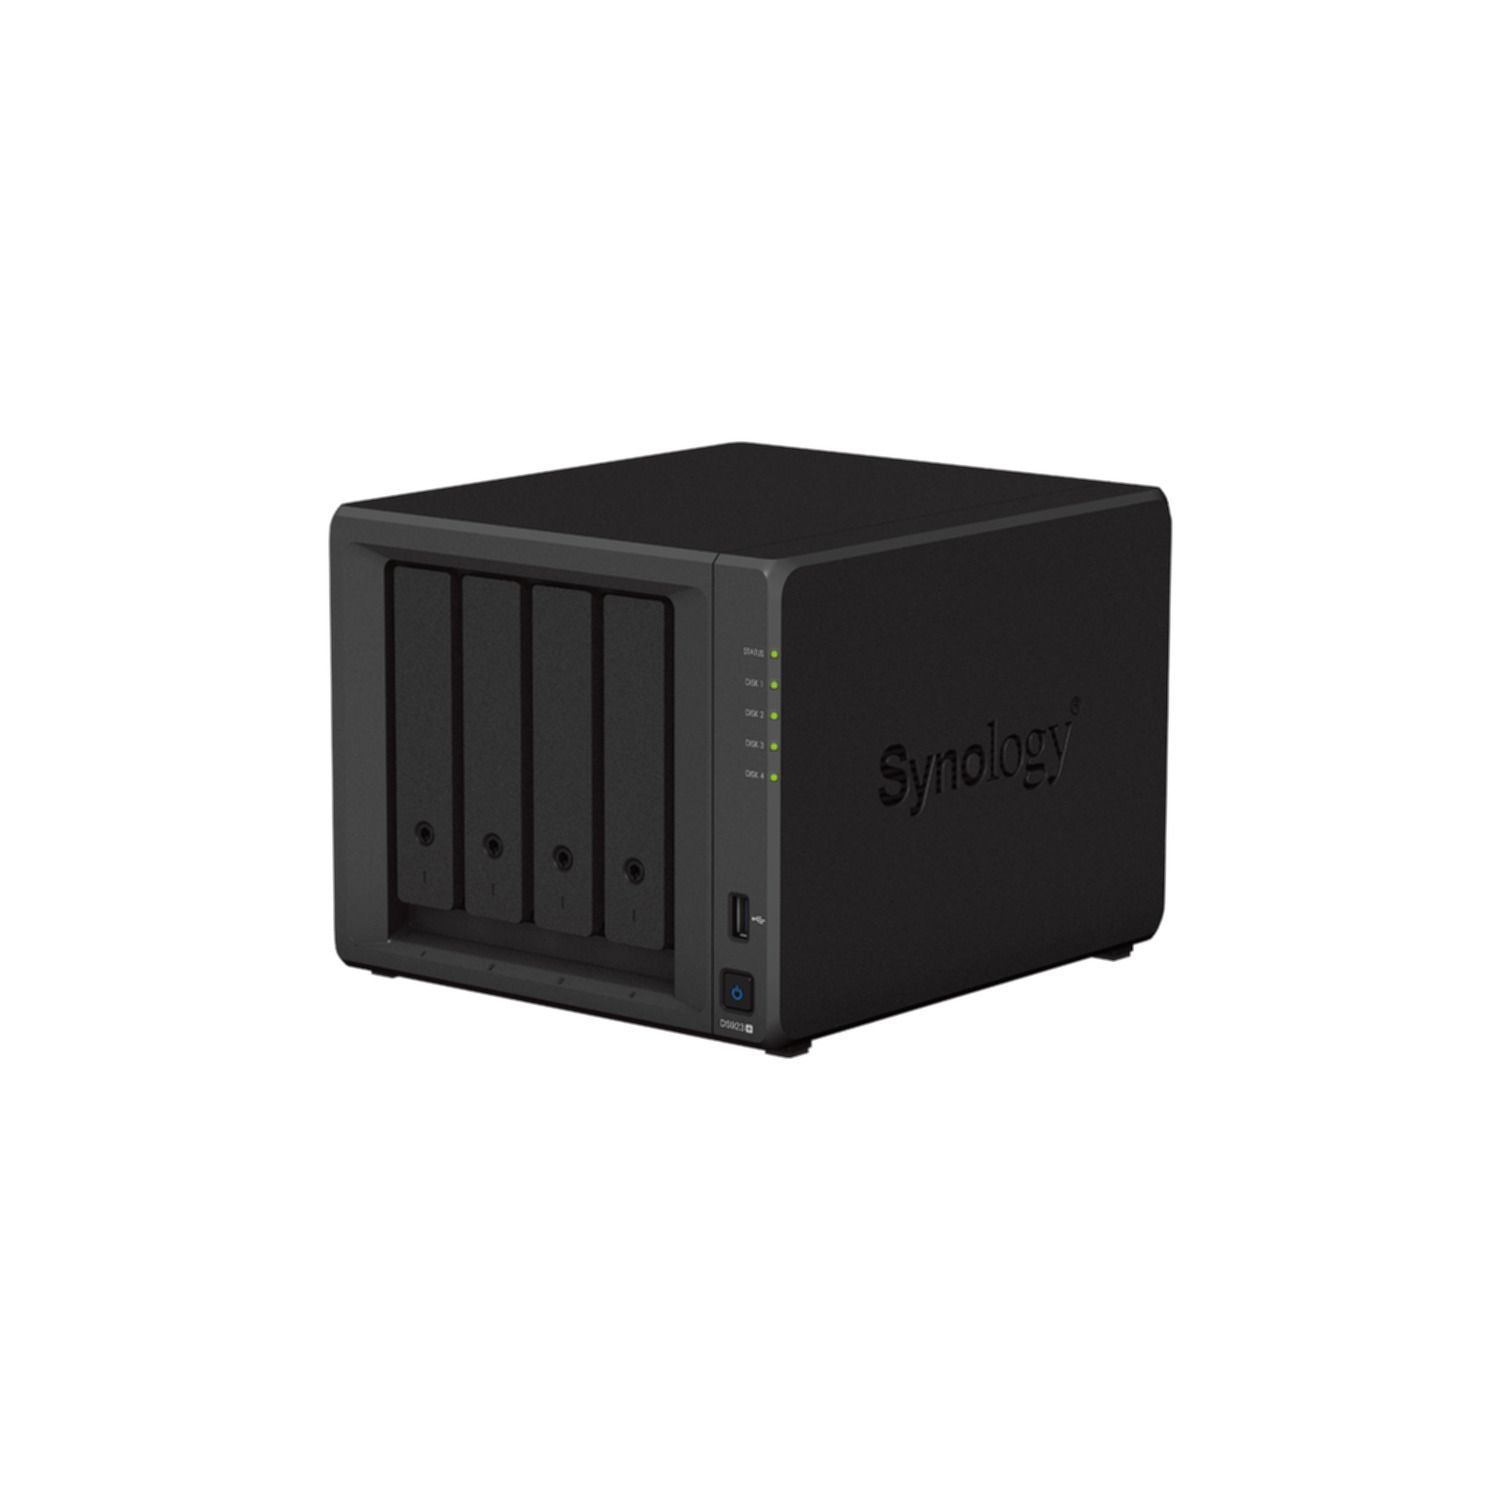 SYNOLOGY DS923+ 0 TB extern 3,5 Zoll